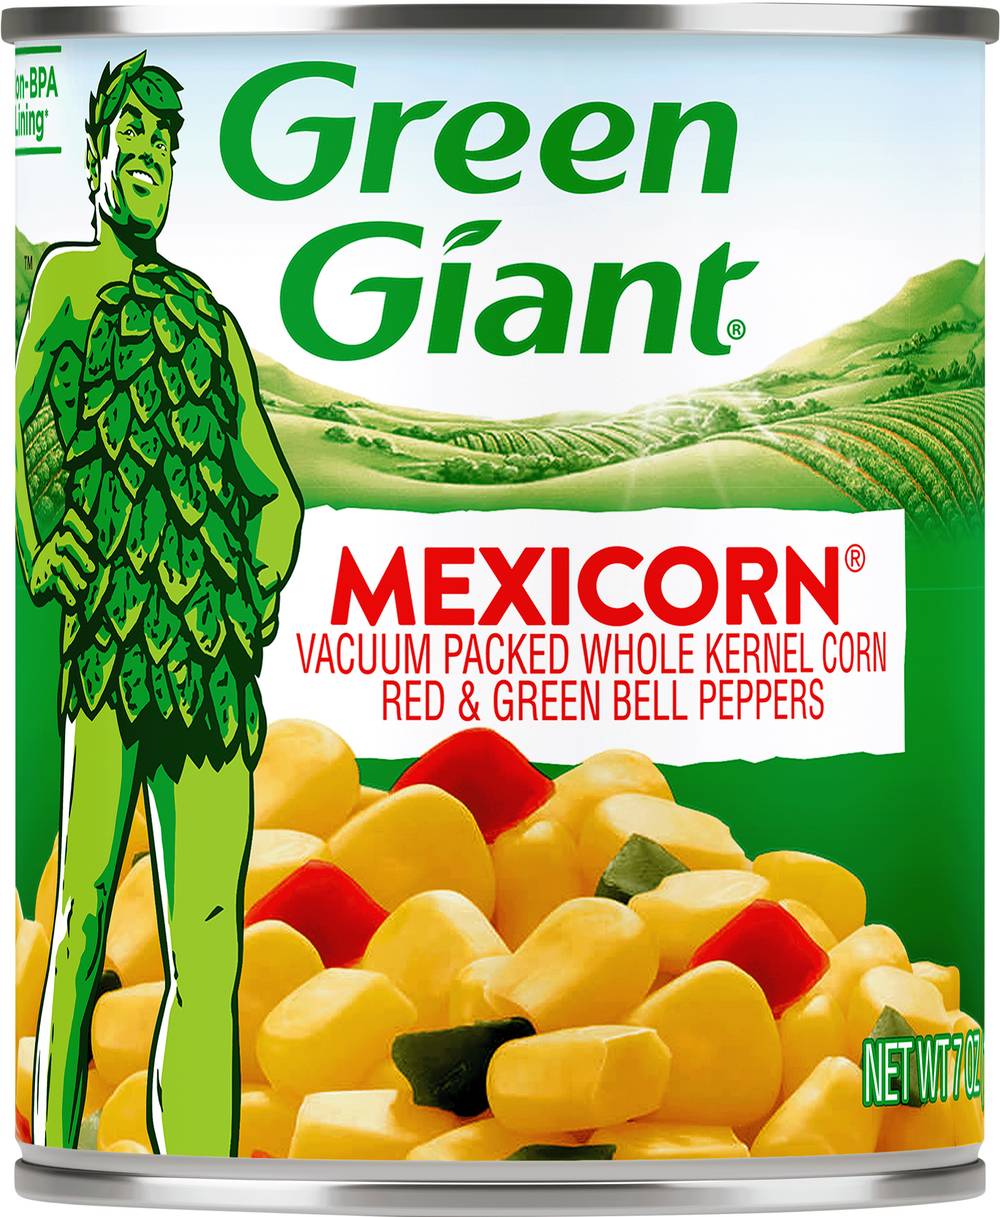 Green Giant Mexicorn Whole Kernel Corn Red & Green Bell Peppers